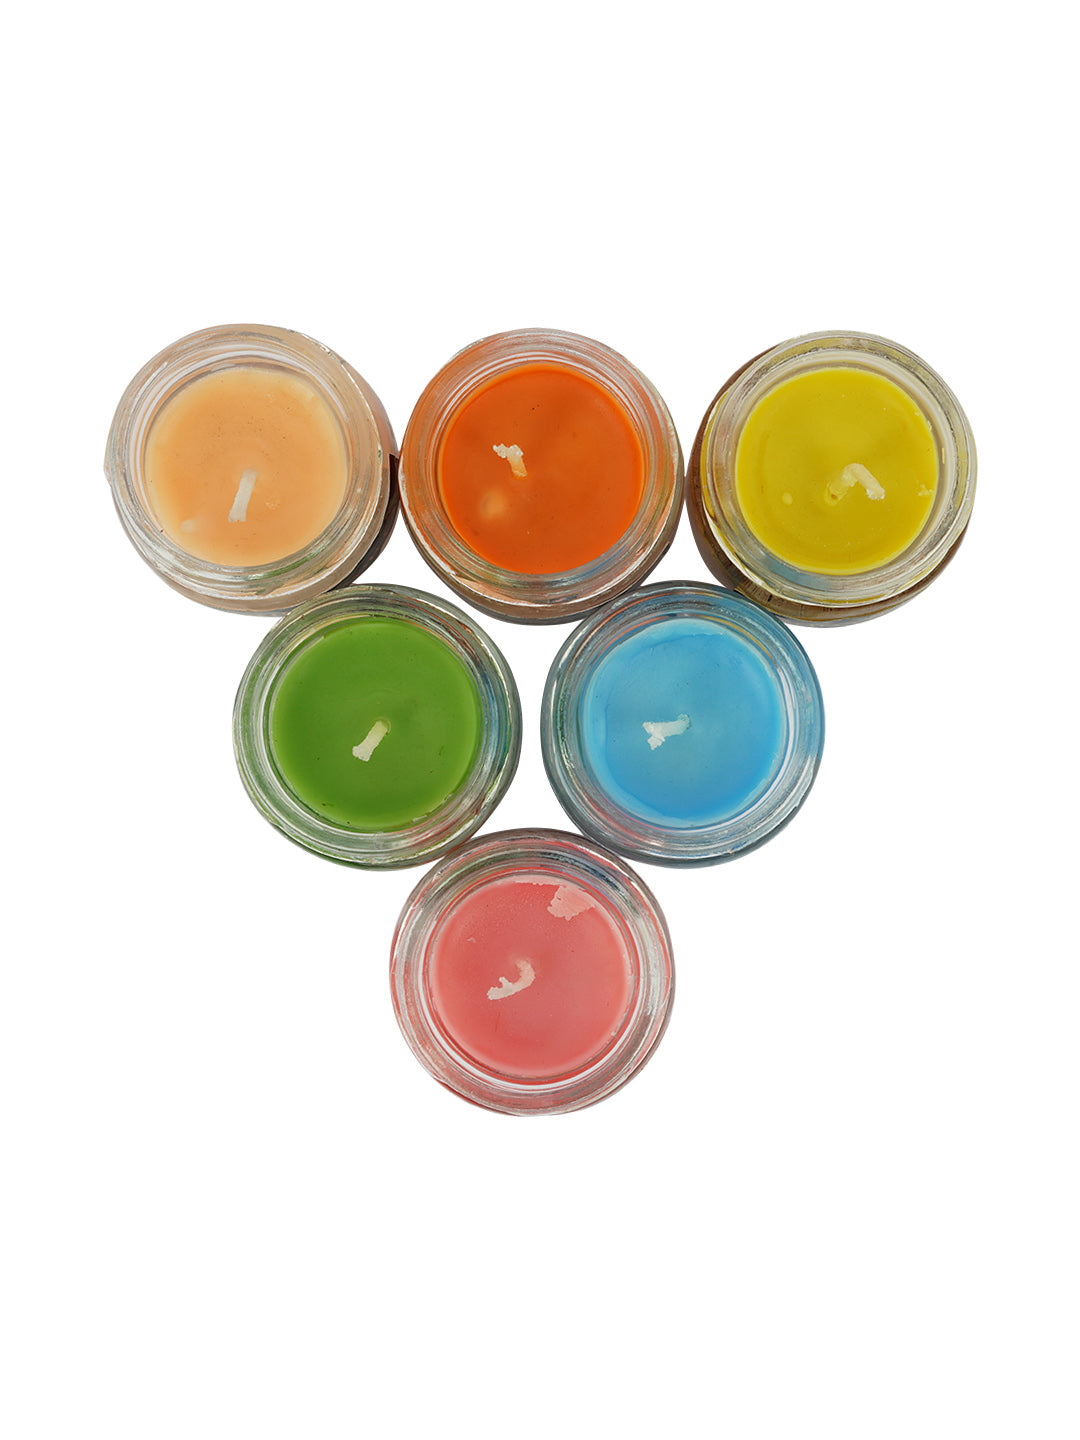 Mini Jar Candle, Set of 6, Scented Candle